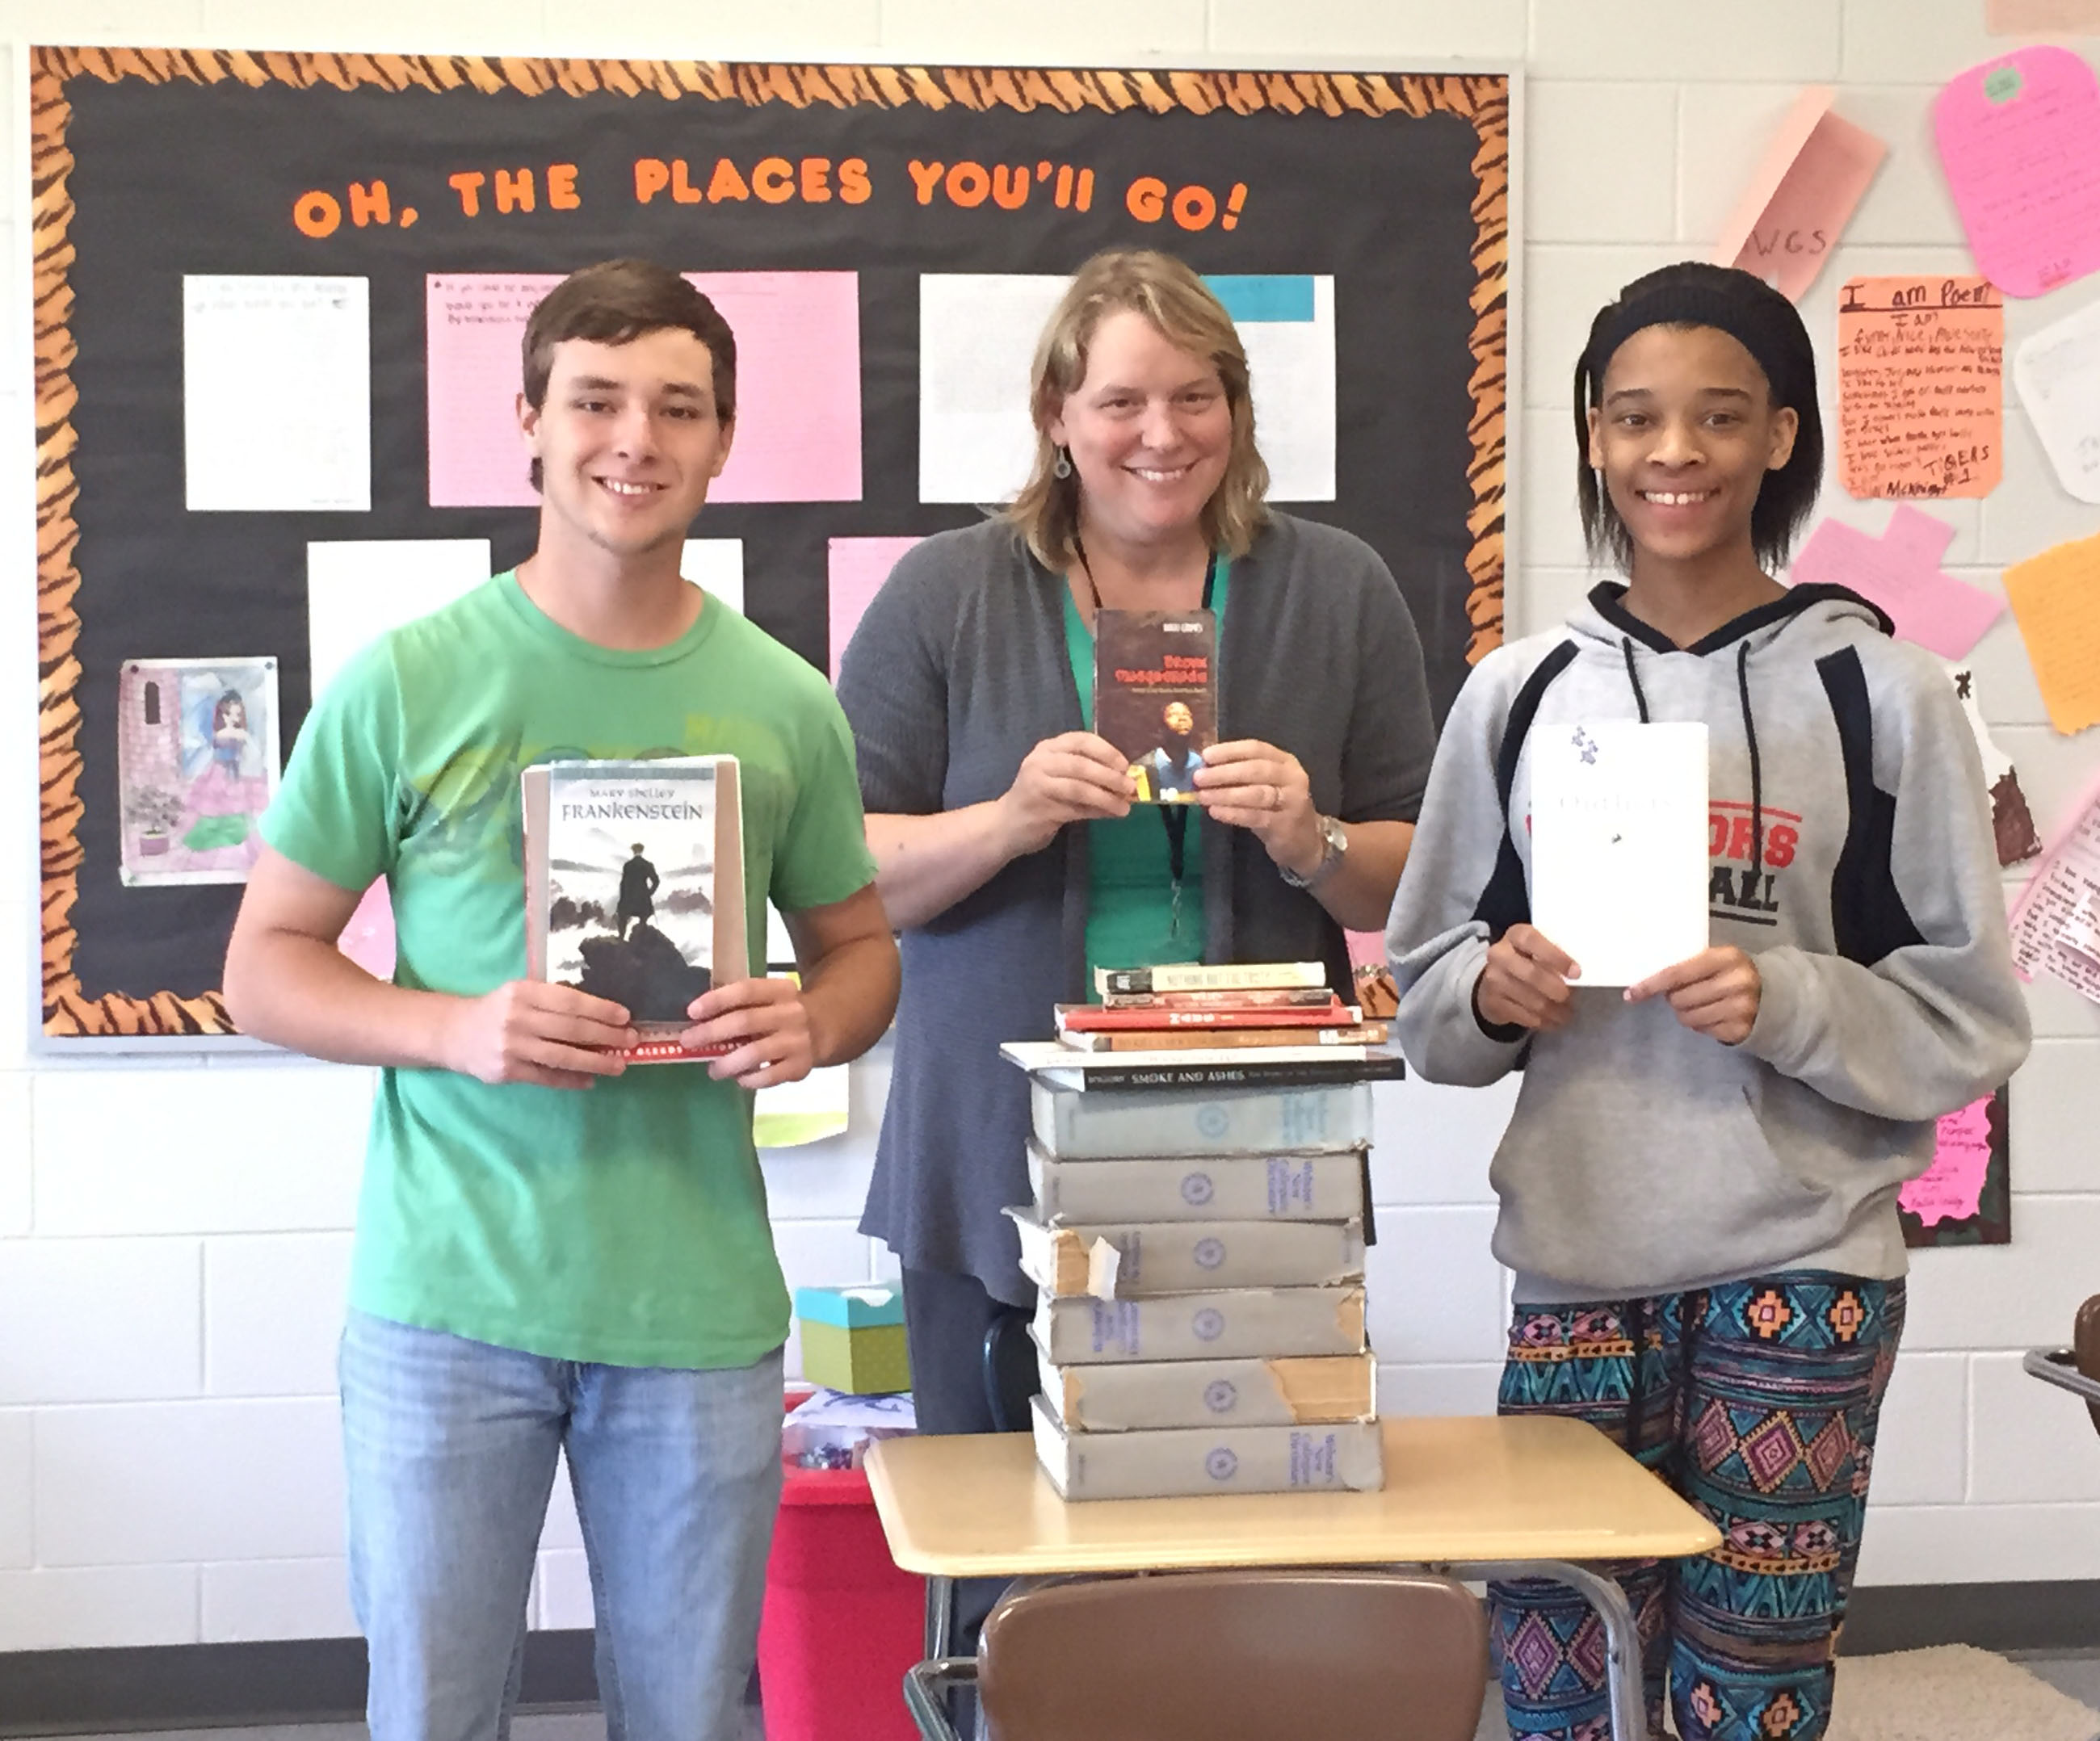 West-Oak High School in Westminster, SC helped us gather books in the Phi Kappa Phi annual book drive. Here are John David Long (sophomore), Heather J. McCrea-Andrews, Ph.D. and Phi Kappa Phi member since 2007, and Ajah Taylor (junior) stacking up part of the donated books. The school rallied around the book drive and everyone pitched in to help with the collection. West-Oak High School contributed 274 books to our Spring 2015 book drive.